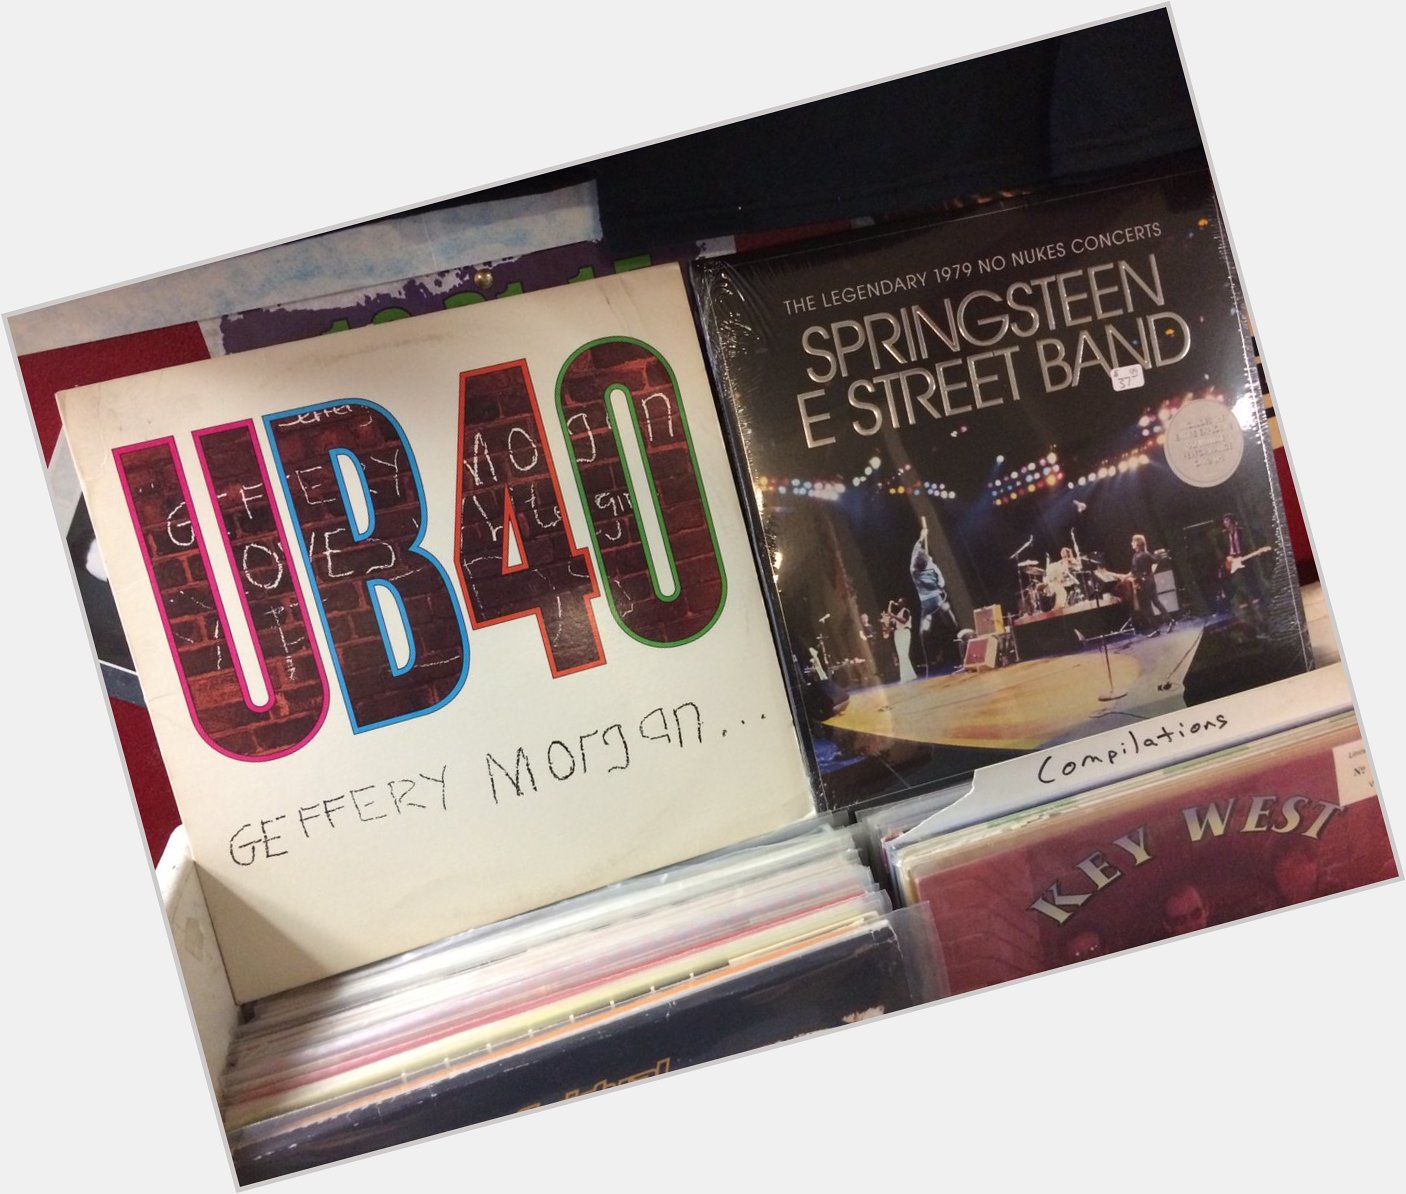 Happy Birthday to Earl Falconer of UB40 & the late Danny Federici of the E Street Band 